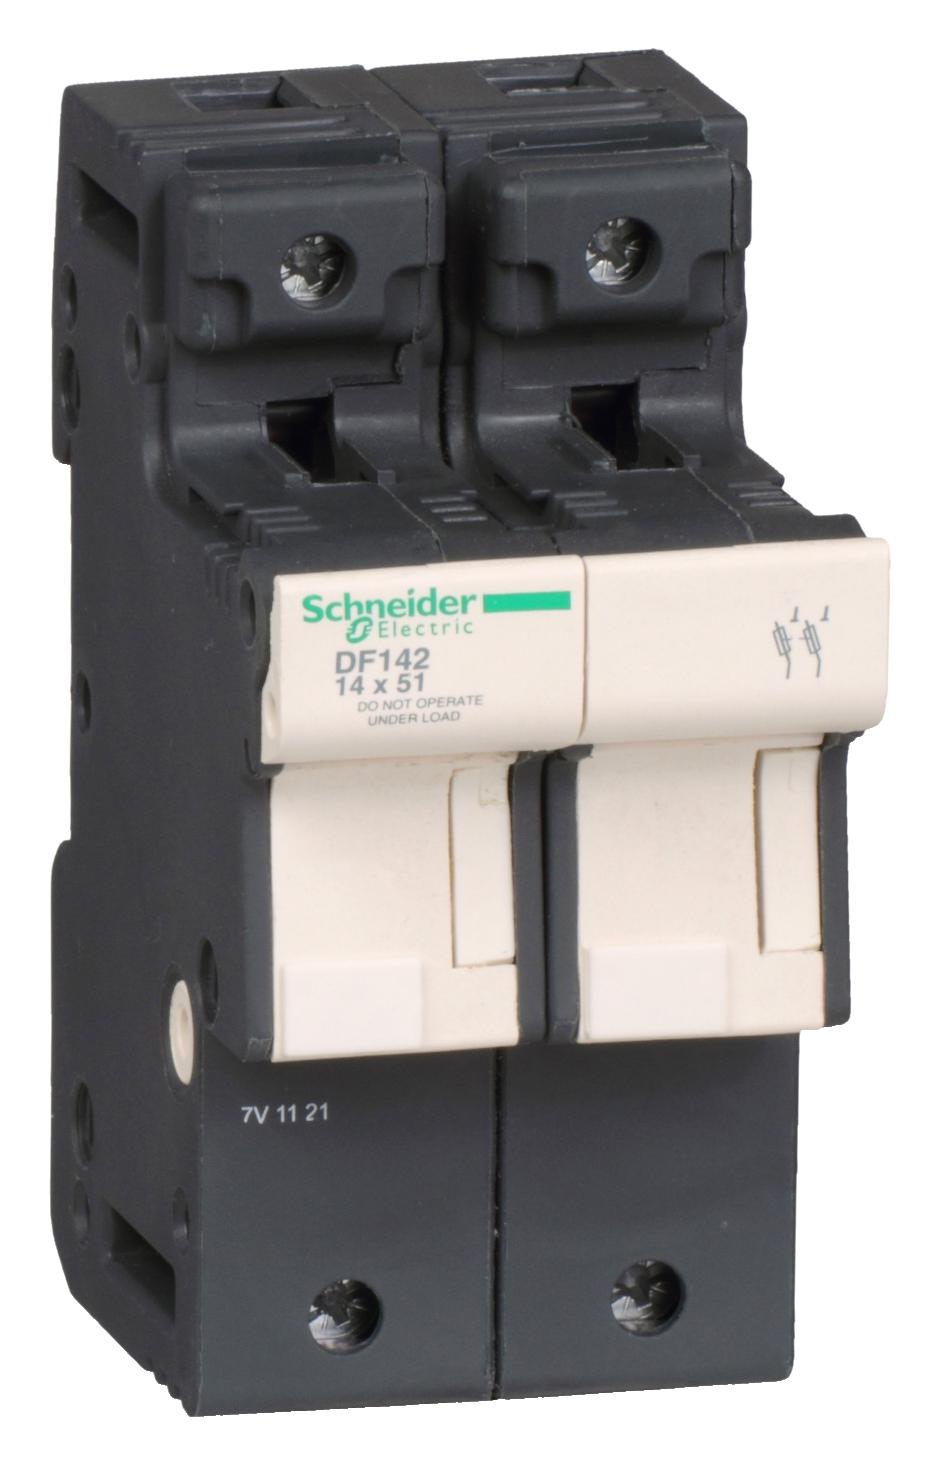 DF142 FUSE HOLDER 2P 50A FOR FUSE 14 X SCHNEIDER ELECTRIC